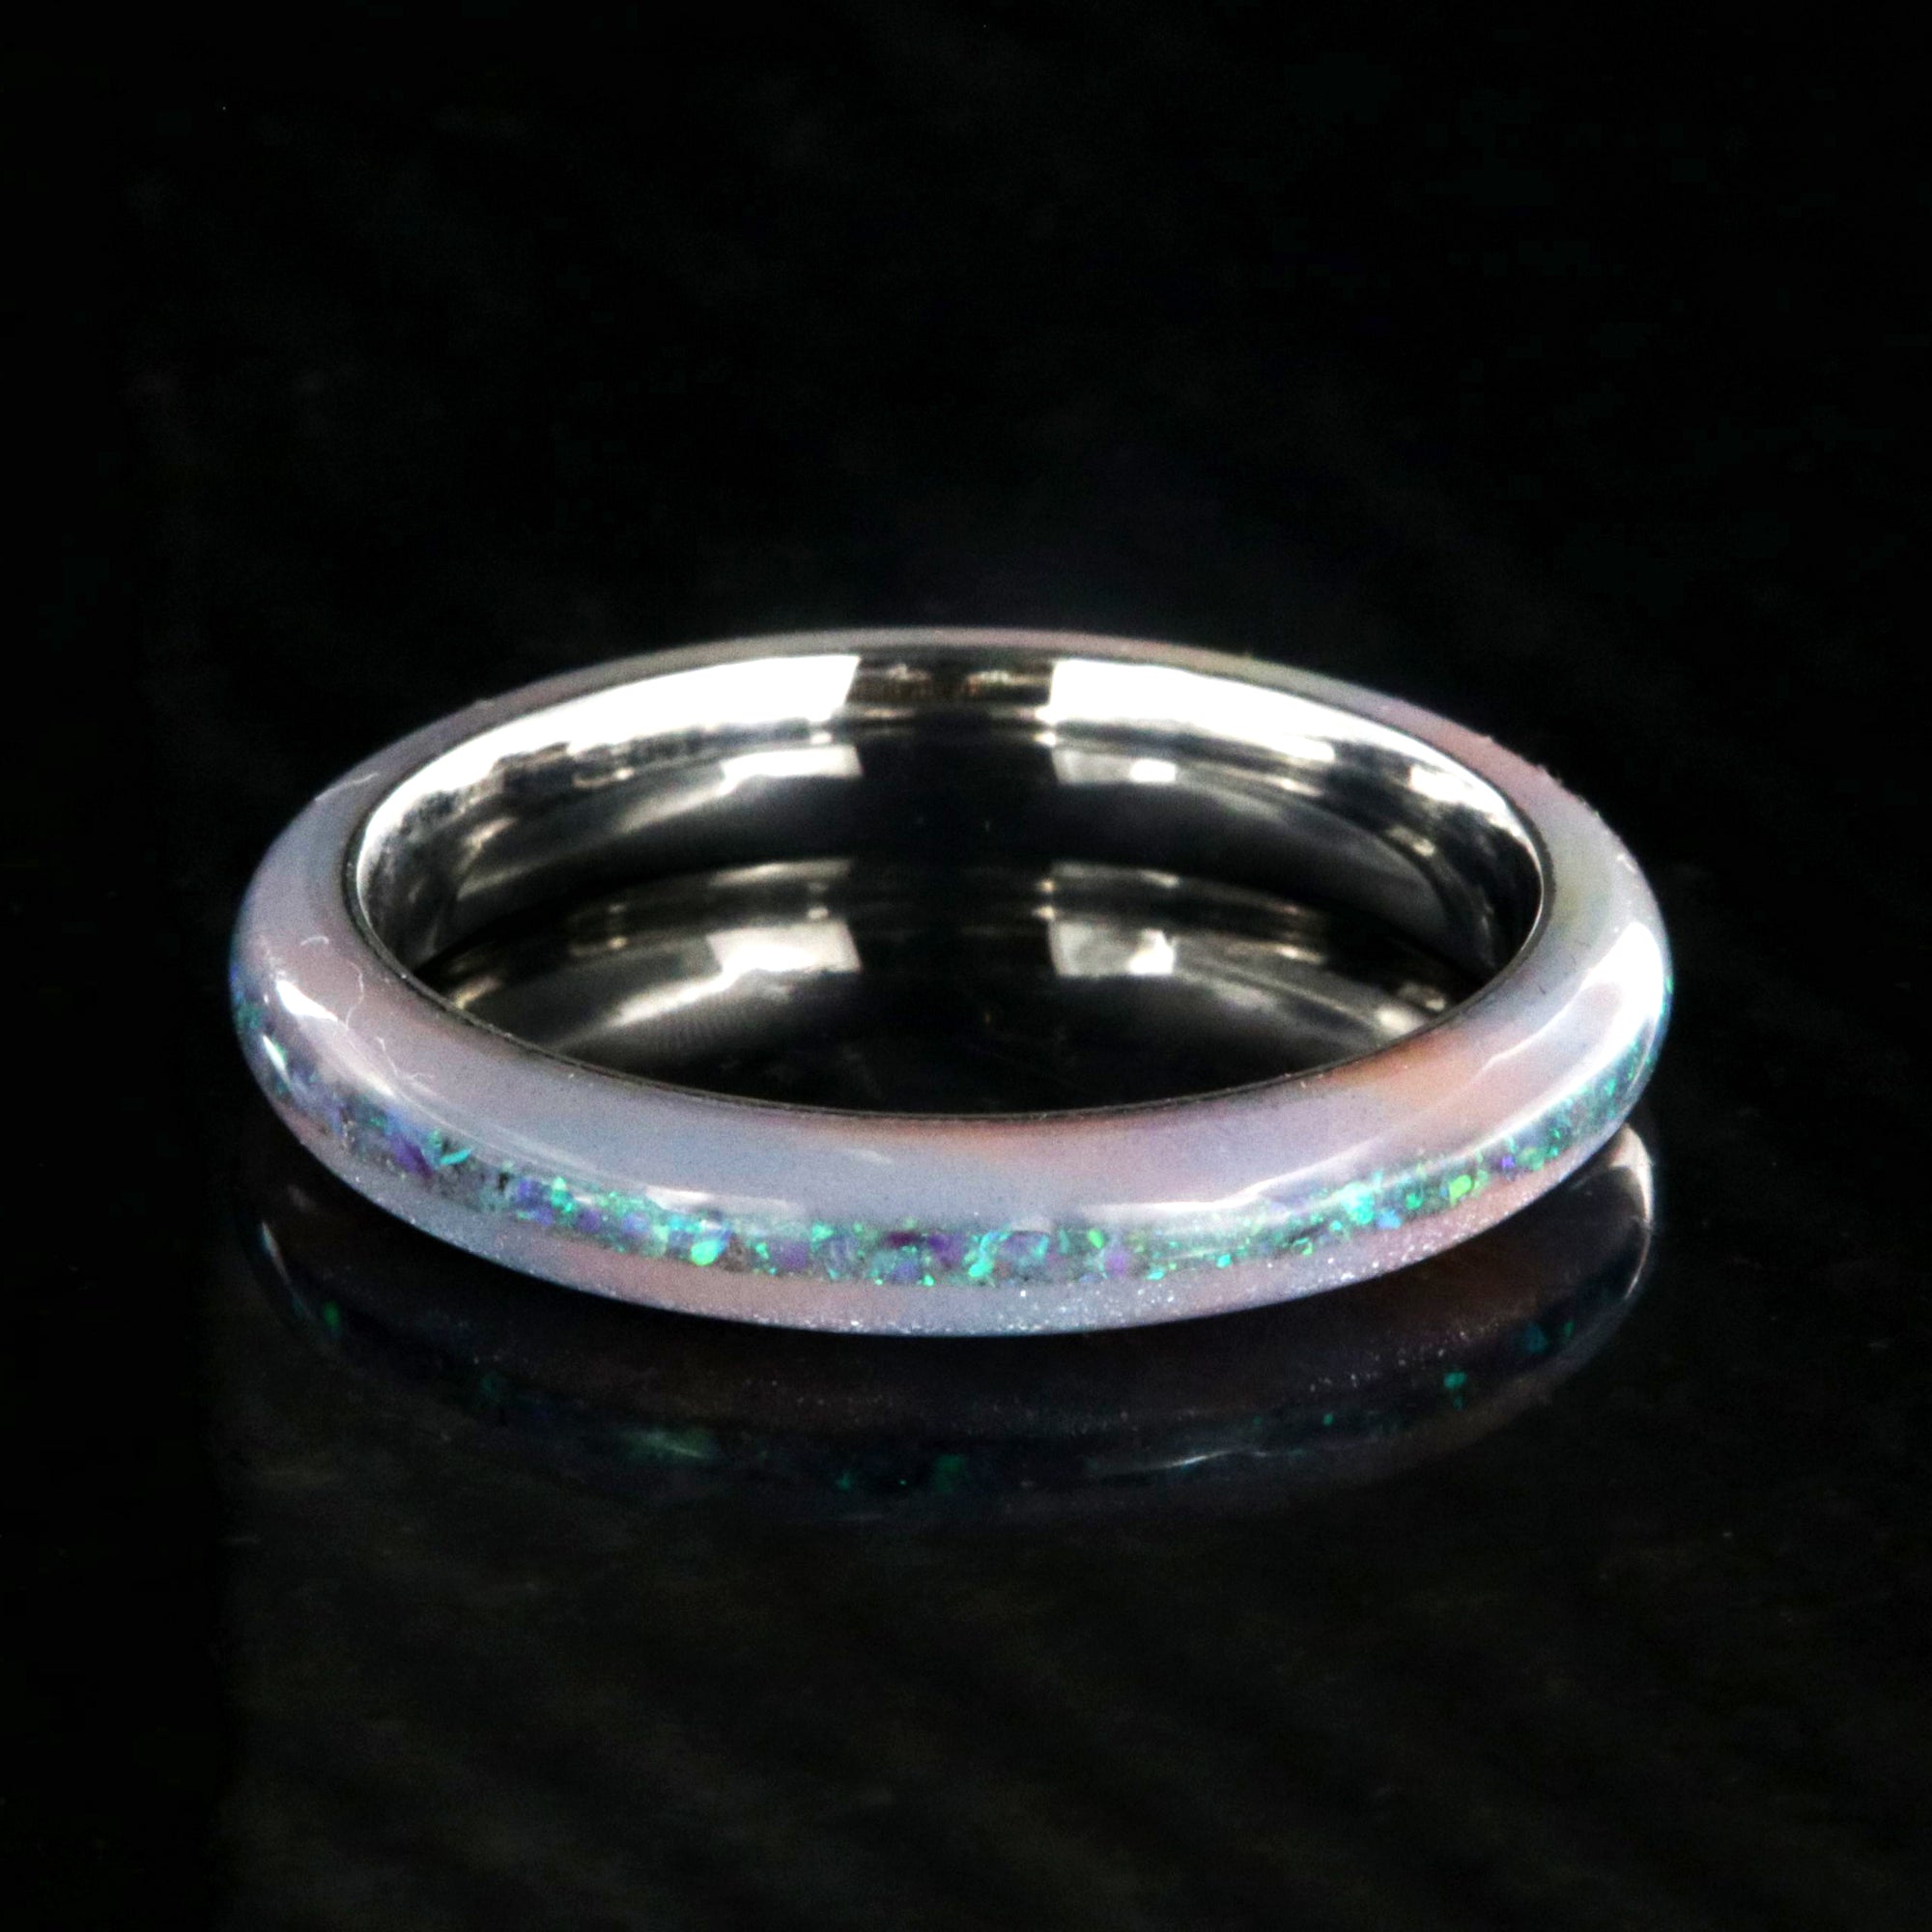 4mm wide promise ring with glittering rainbow edges and a crushed opal inlay